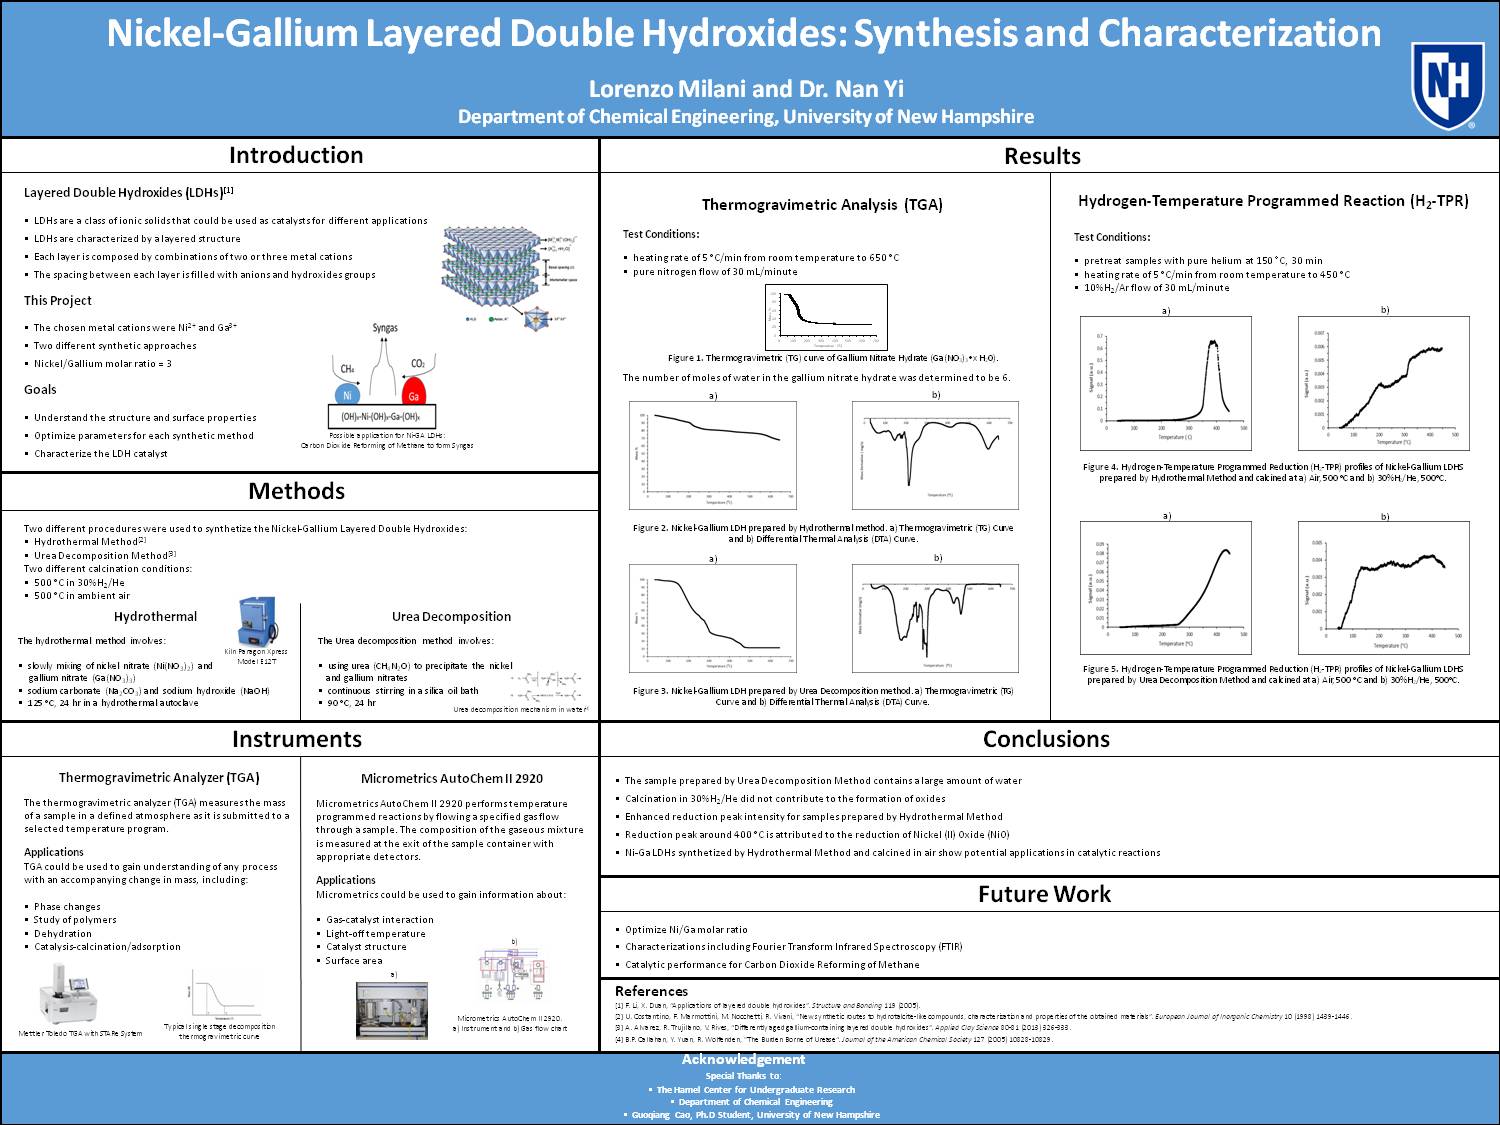 Nickel-Gallium Layered Double Hydroxides: Synthesis And Characterization by lm2014